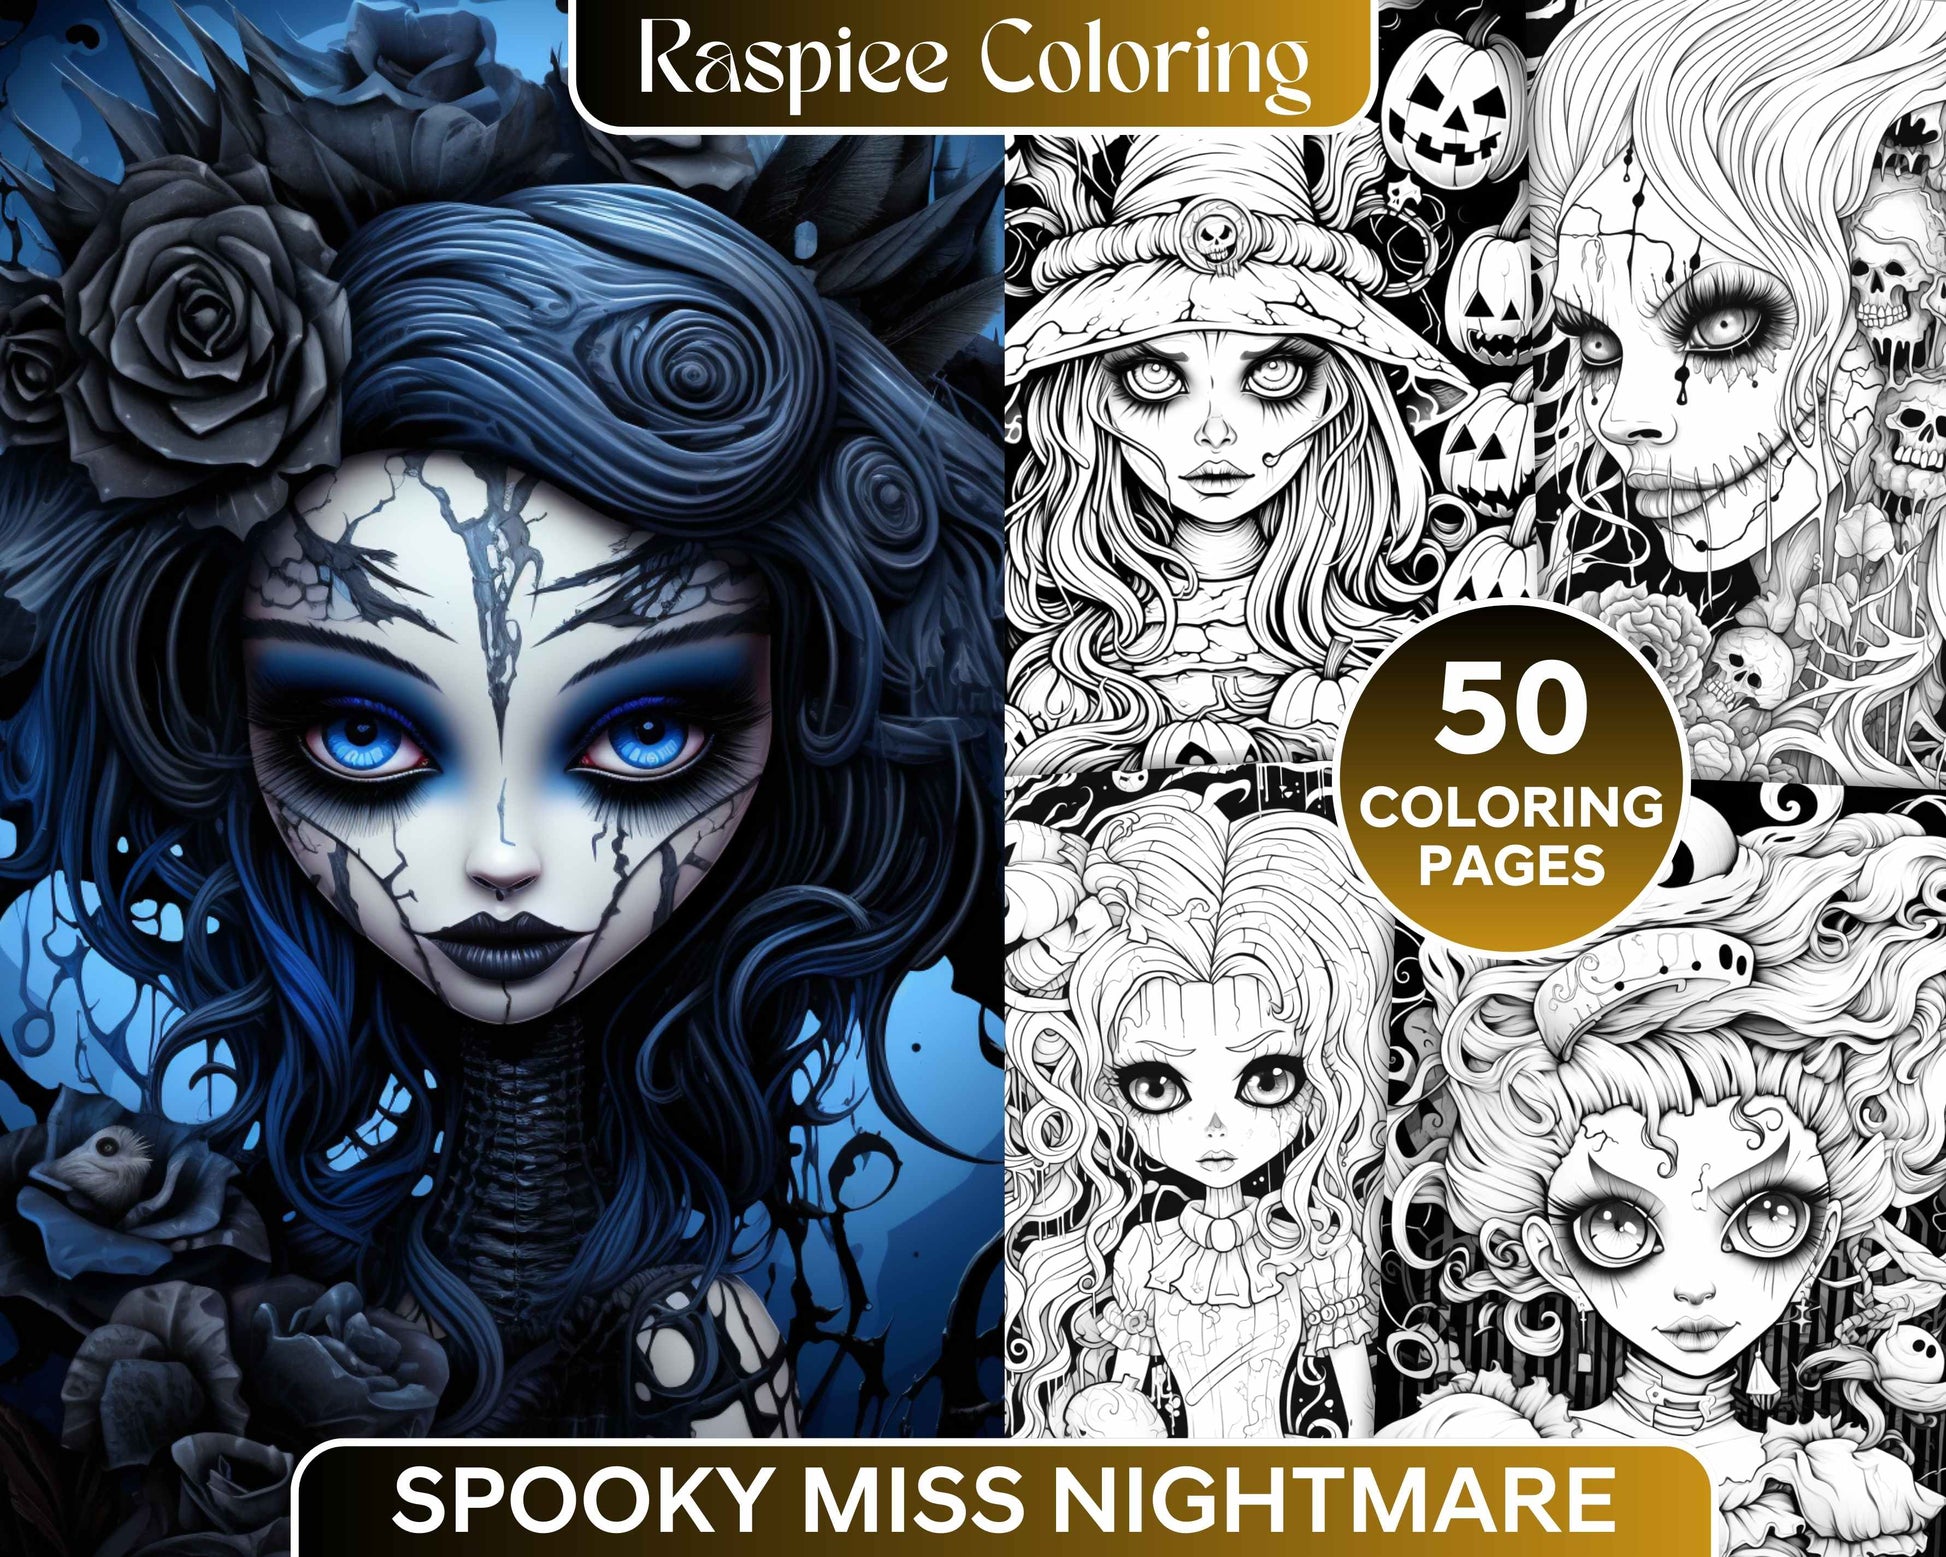 Spooky miss nightmare grayscale coloring pages printable for adults â coloring